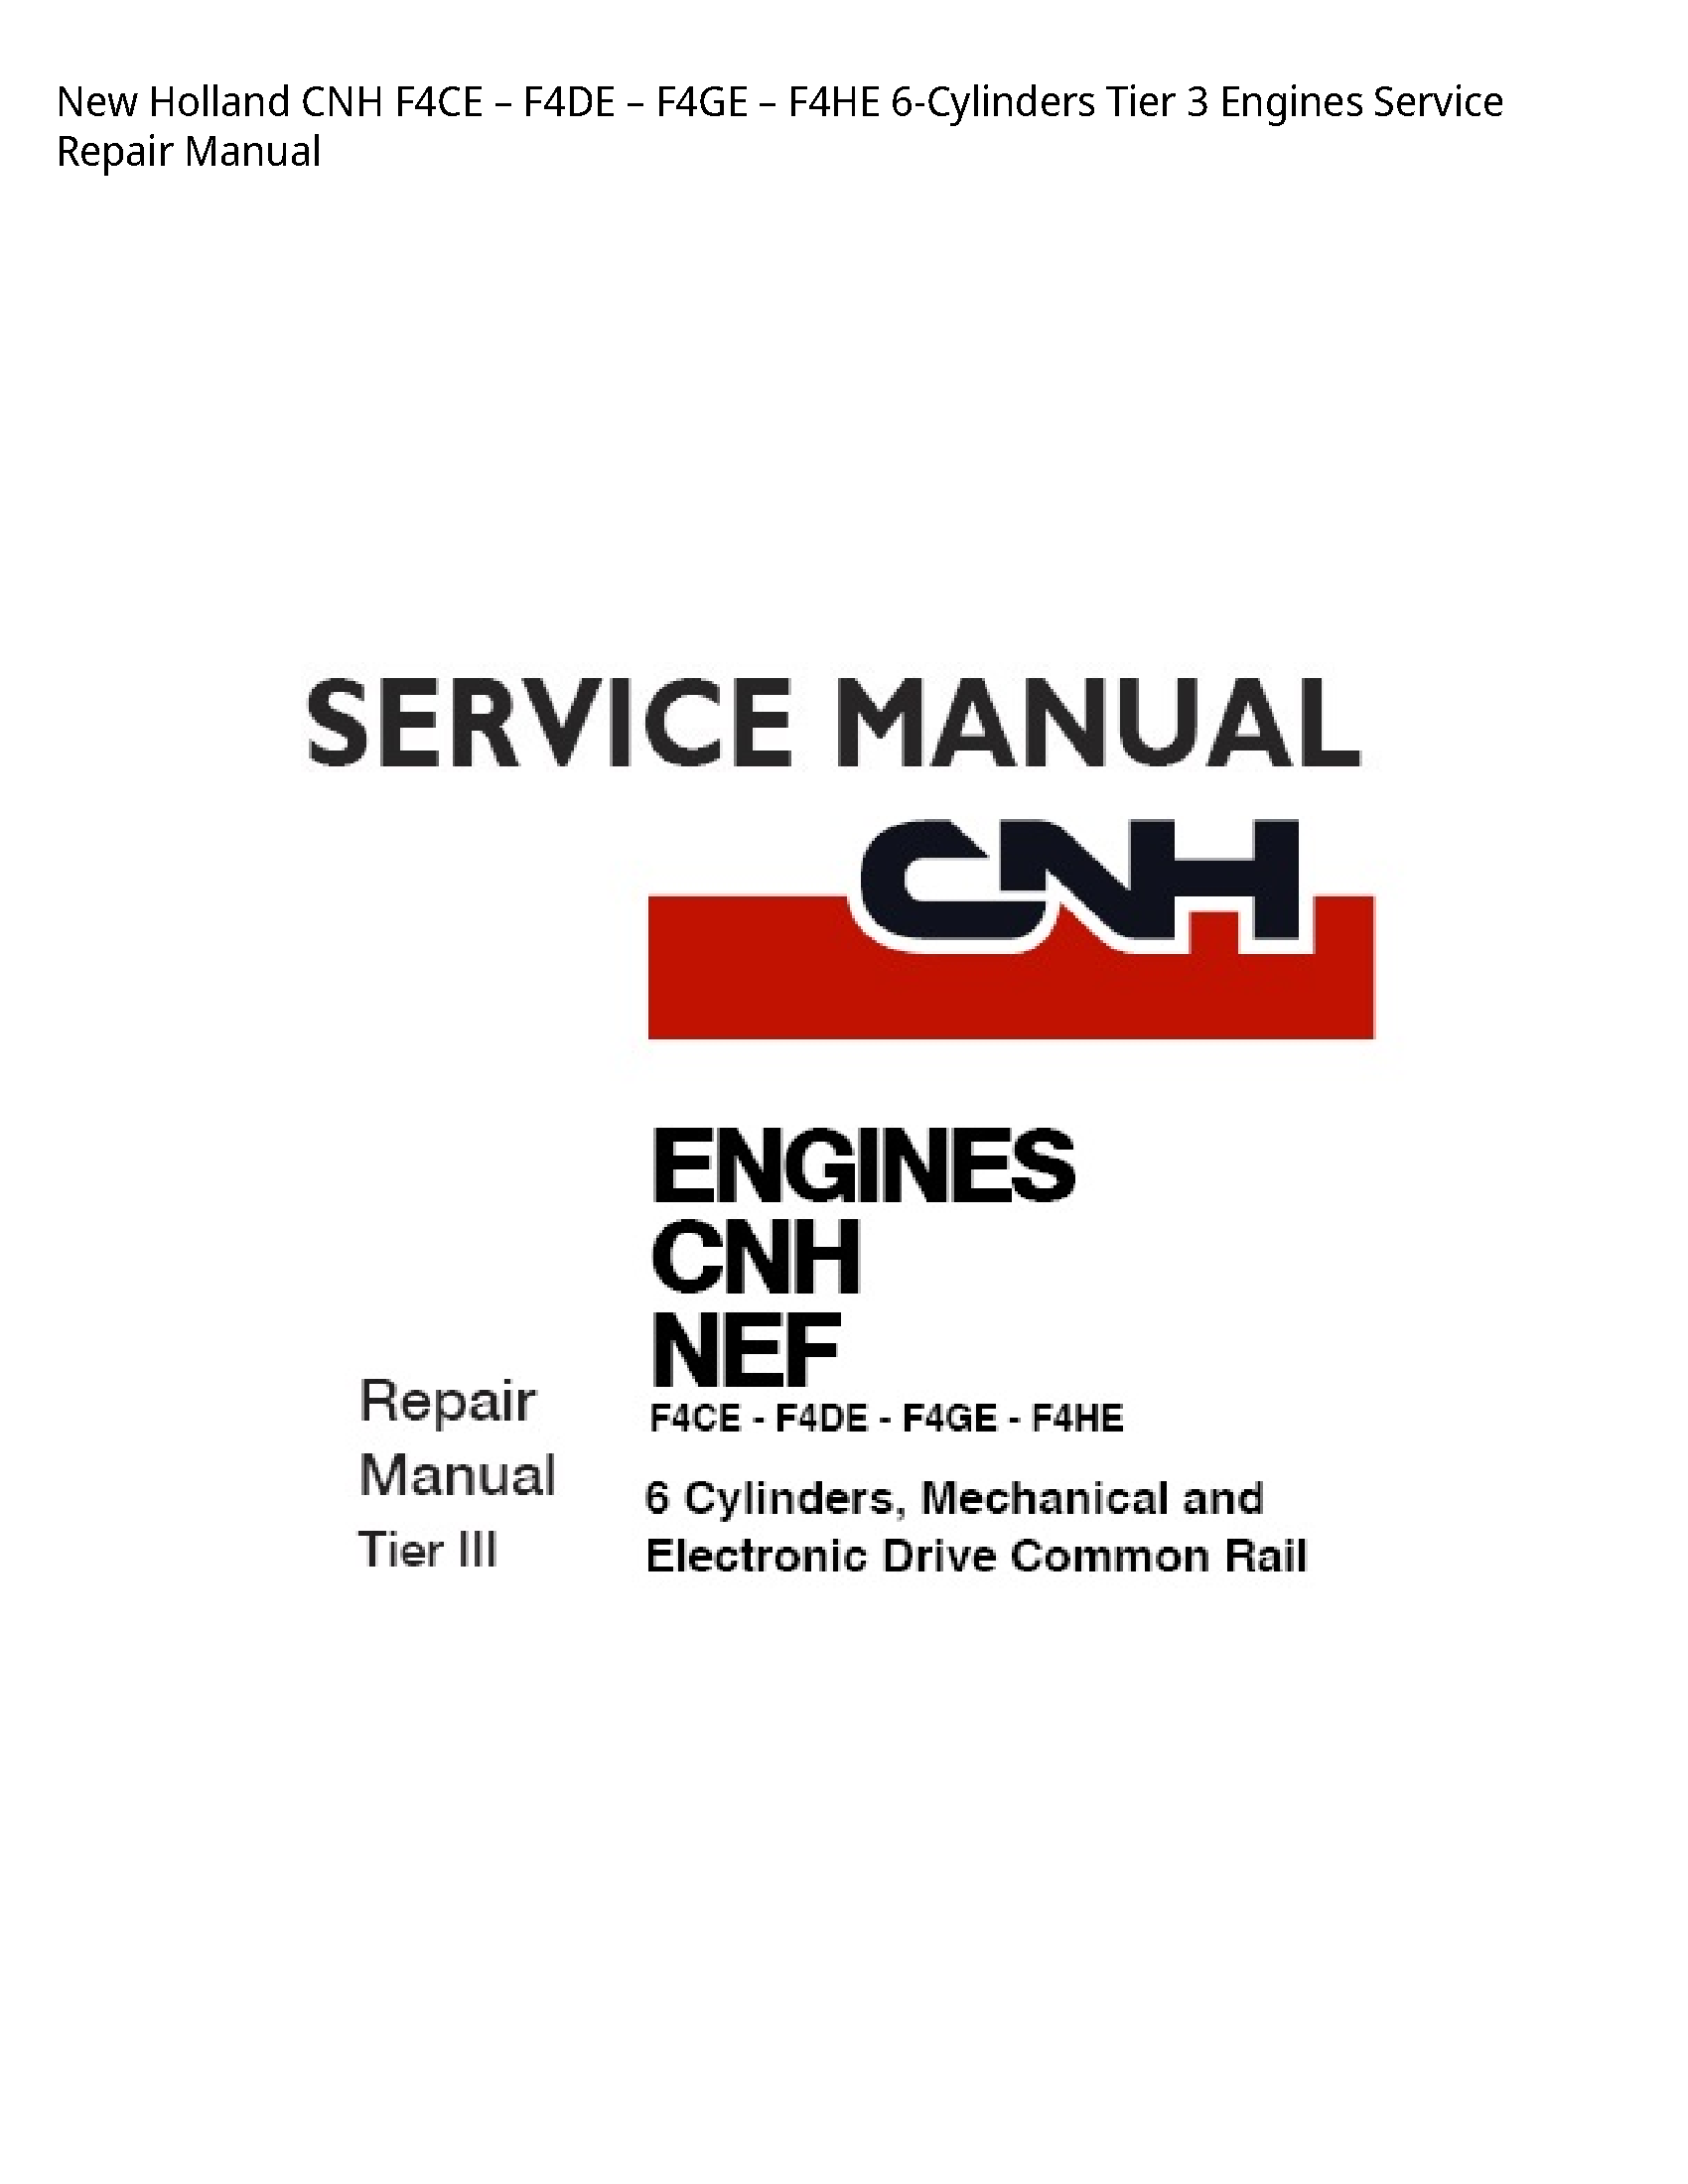 New Holland F4CE CNH Tier Engines manual